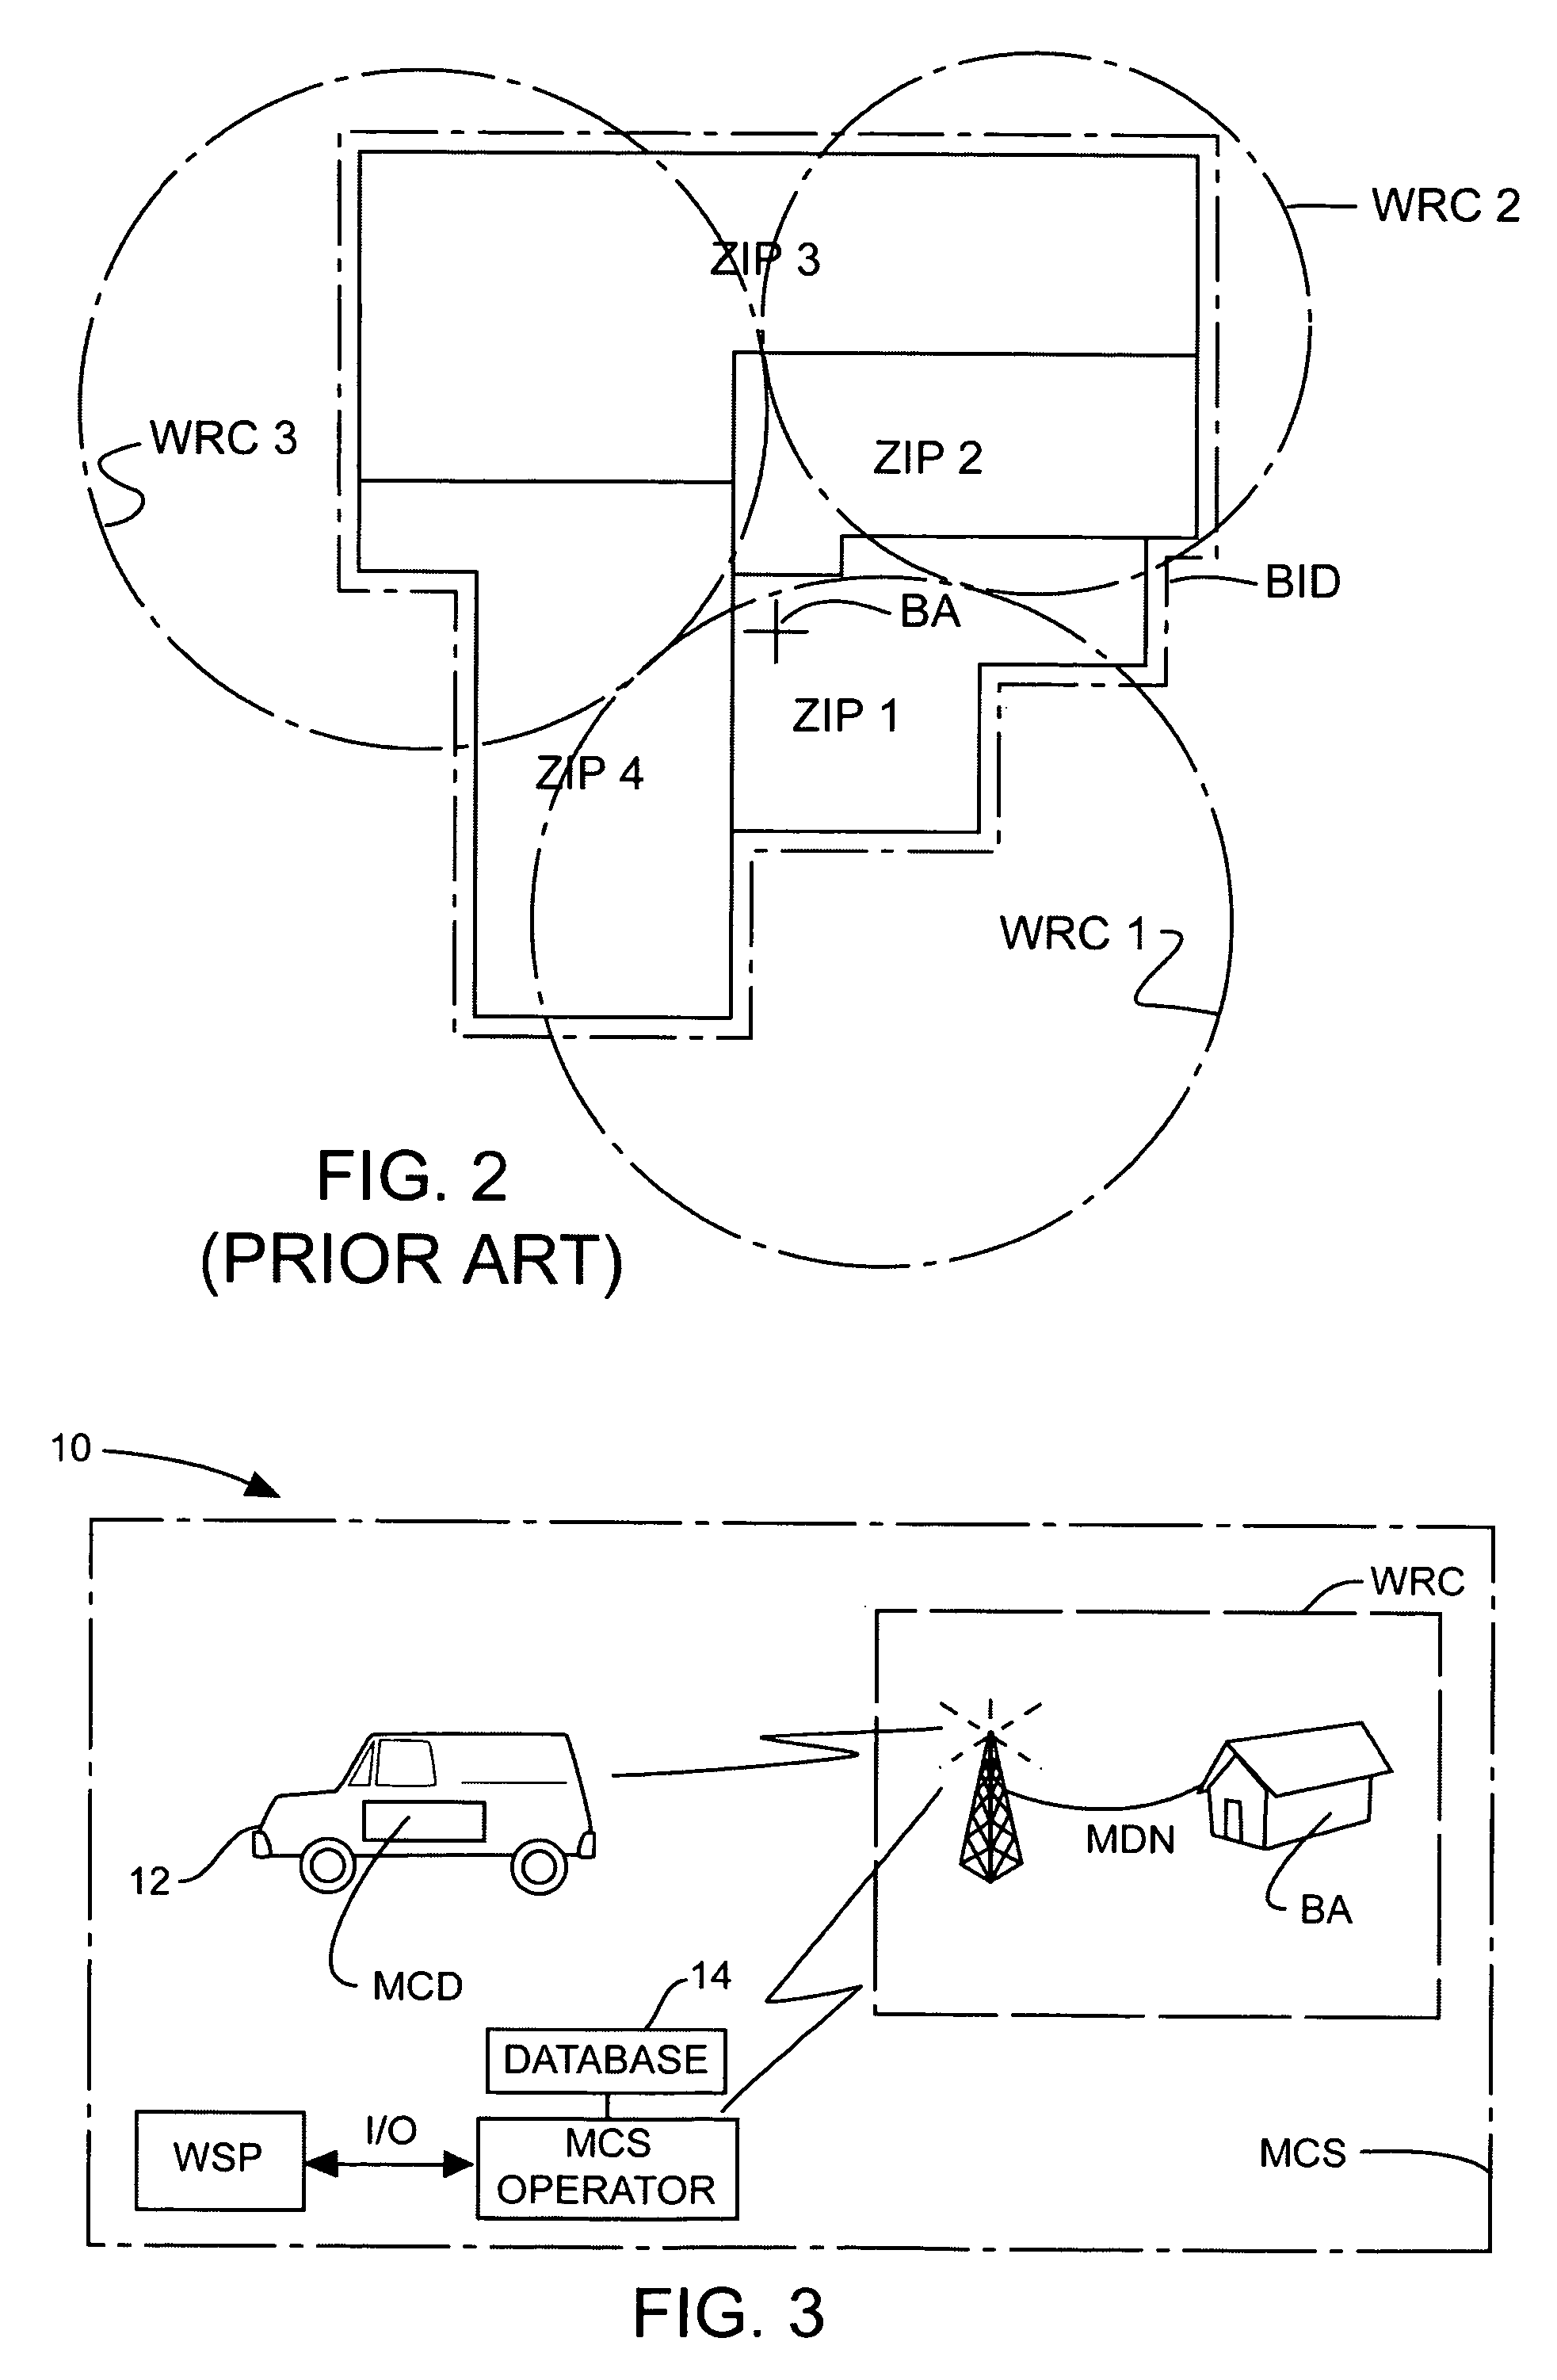 Assigning a local access telephone number to a wireless mobile communication device